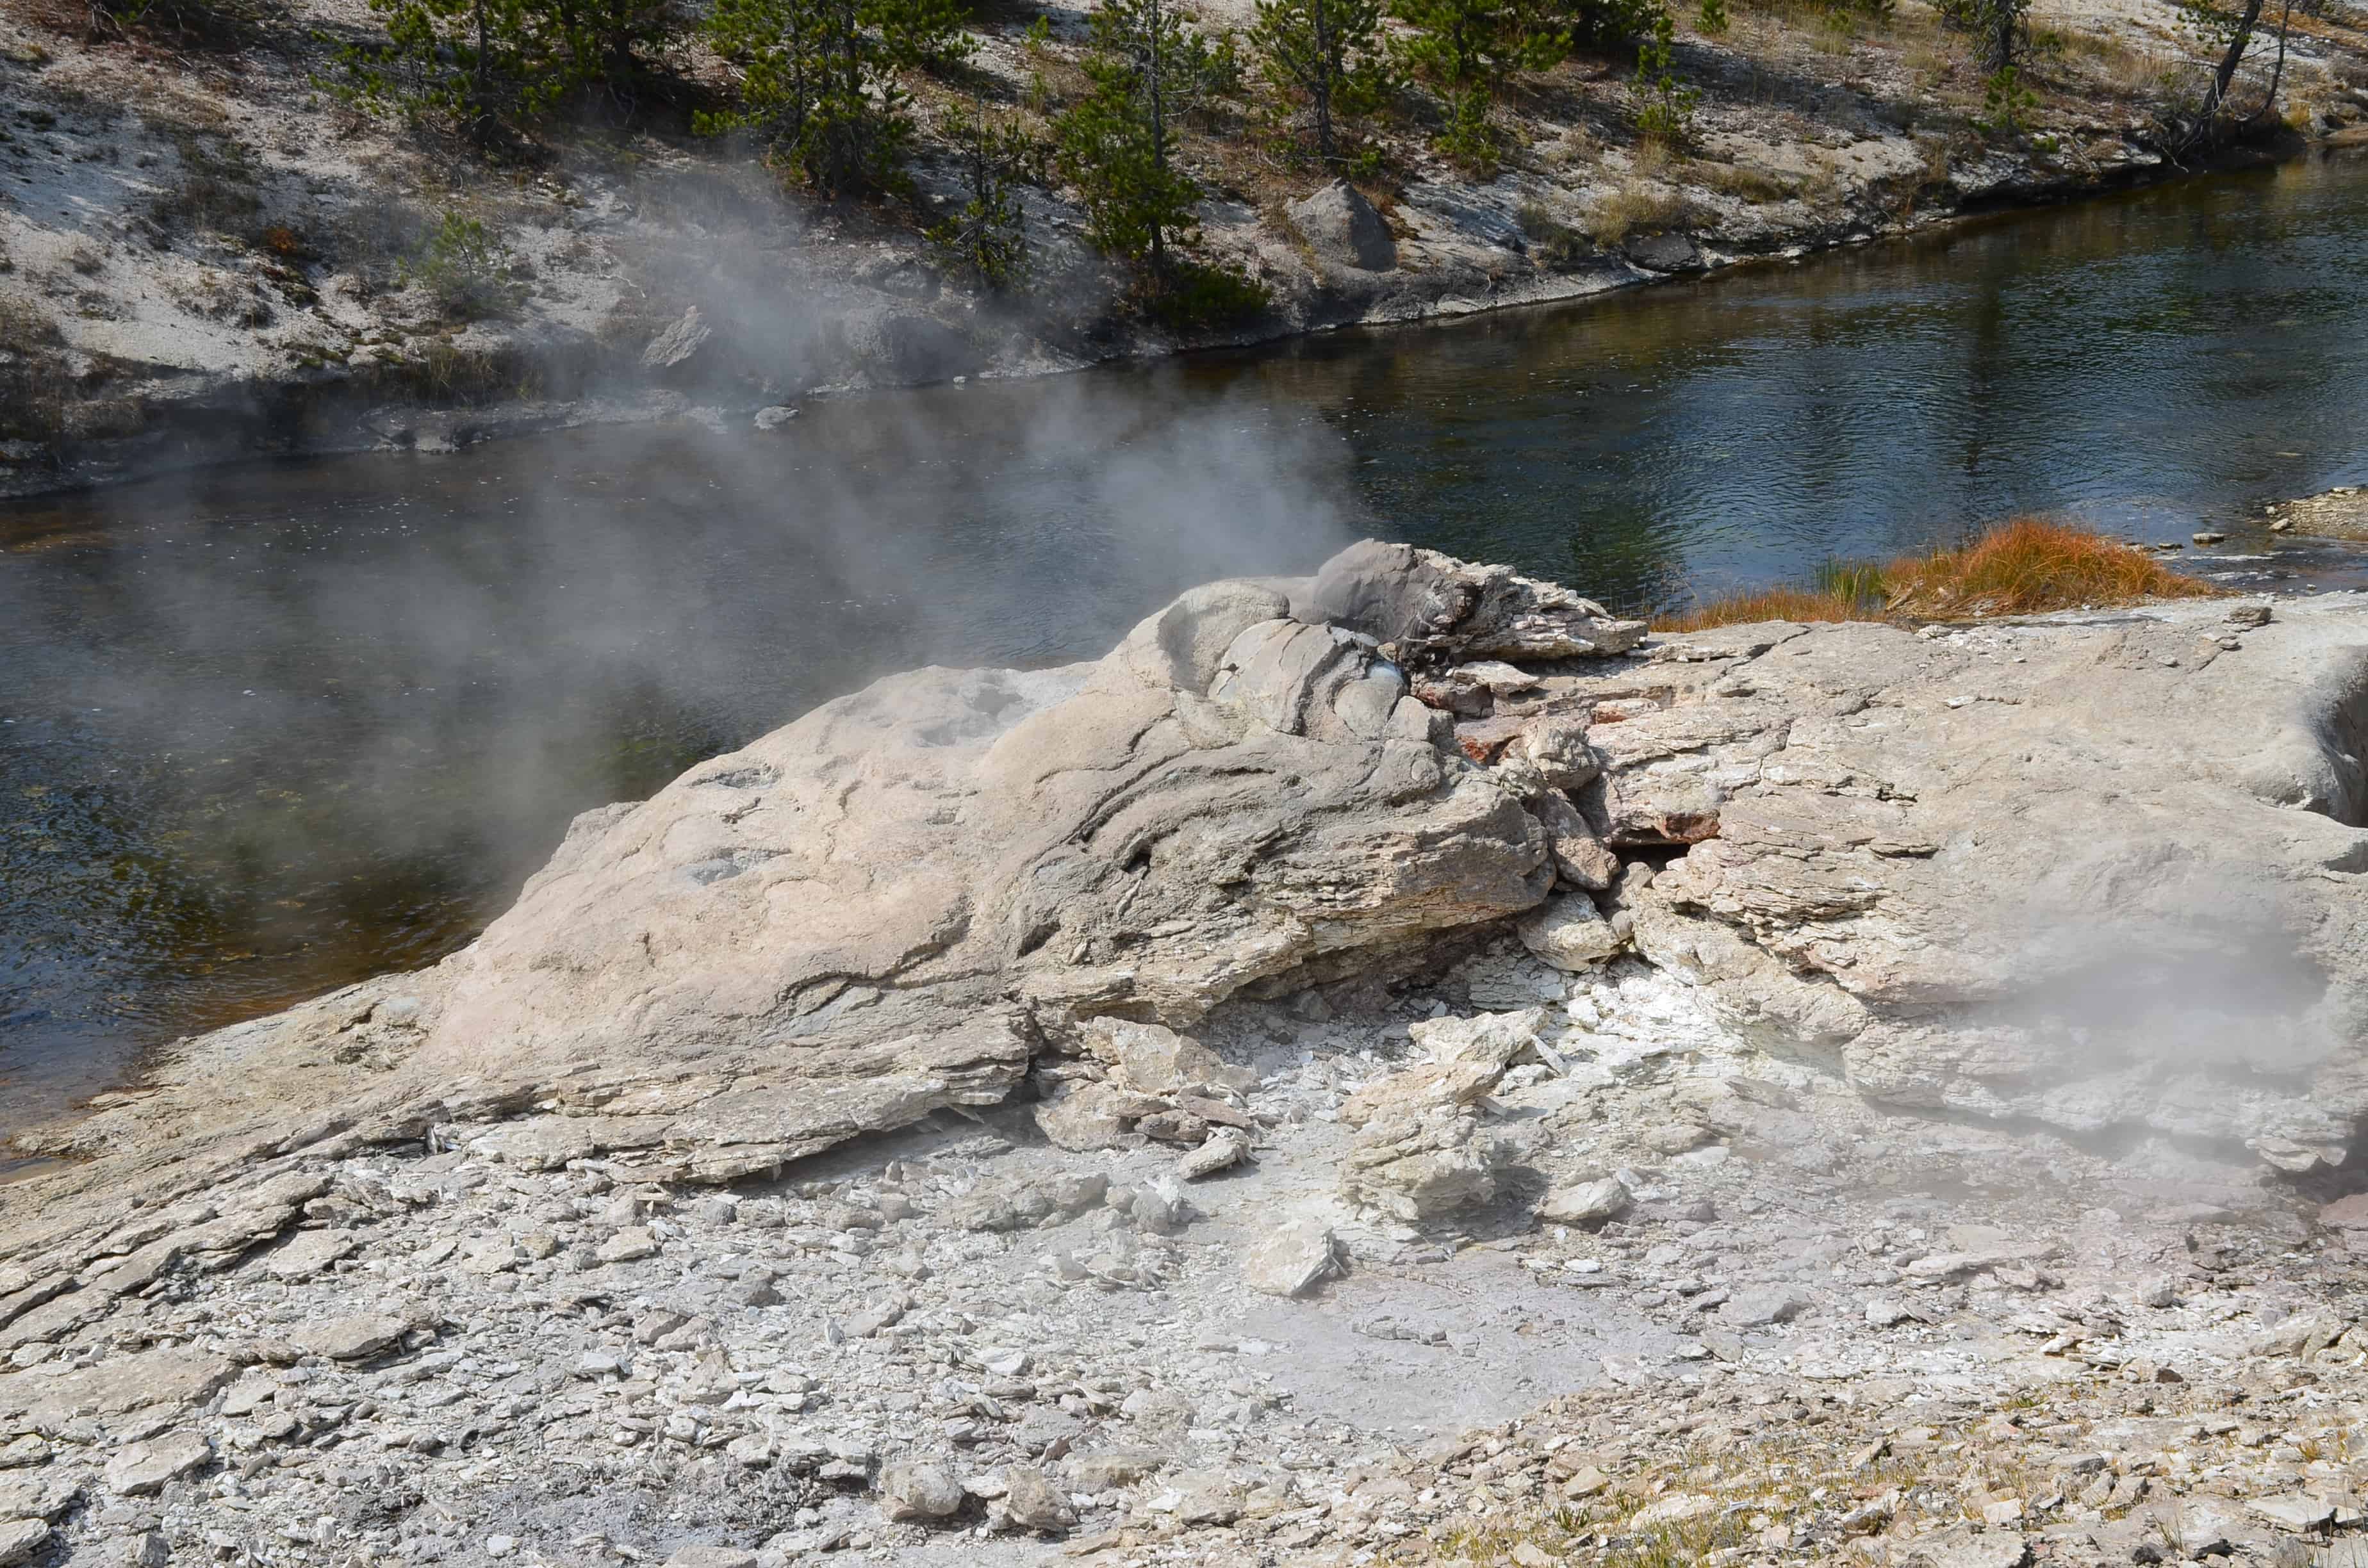 Mortar Geyser at the Upper Geyser Basin in Yellowstone National Park, Wyoming